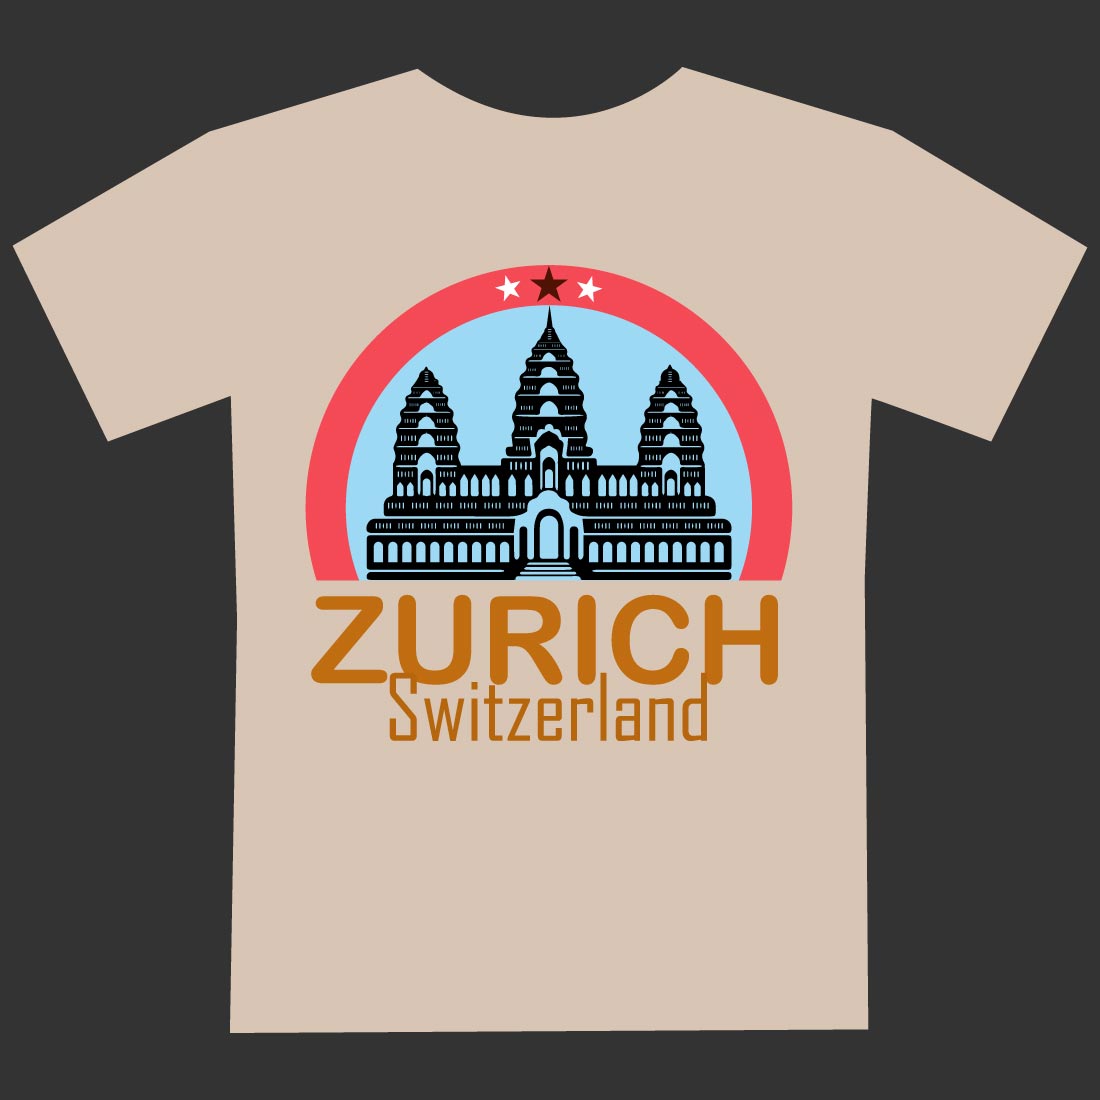 For a festival in Zurich, Switzerland, you might want your T-shirt design to capture the essence of the city and the event cover image.